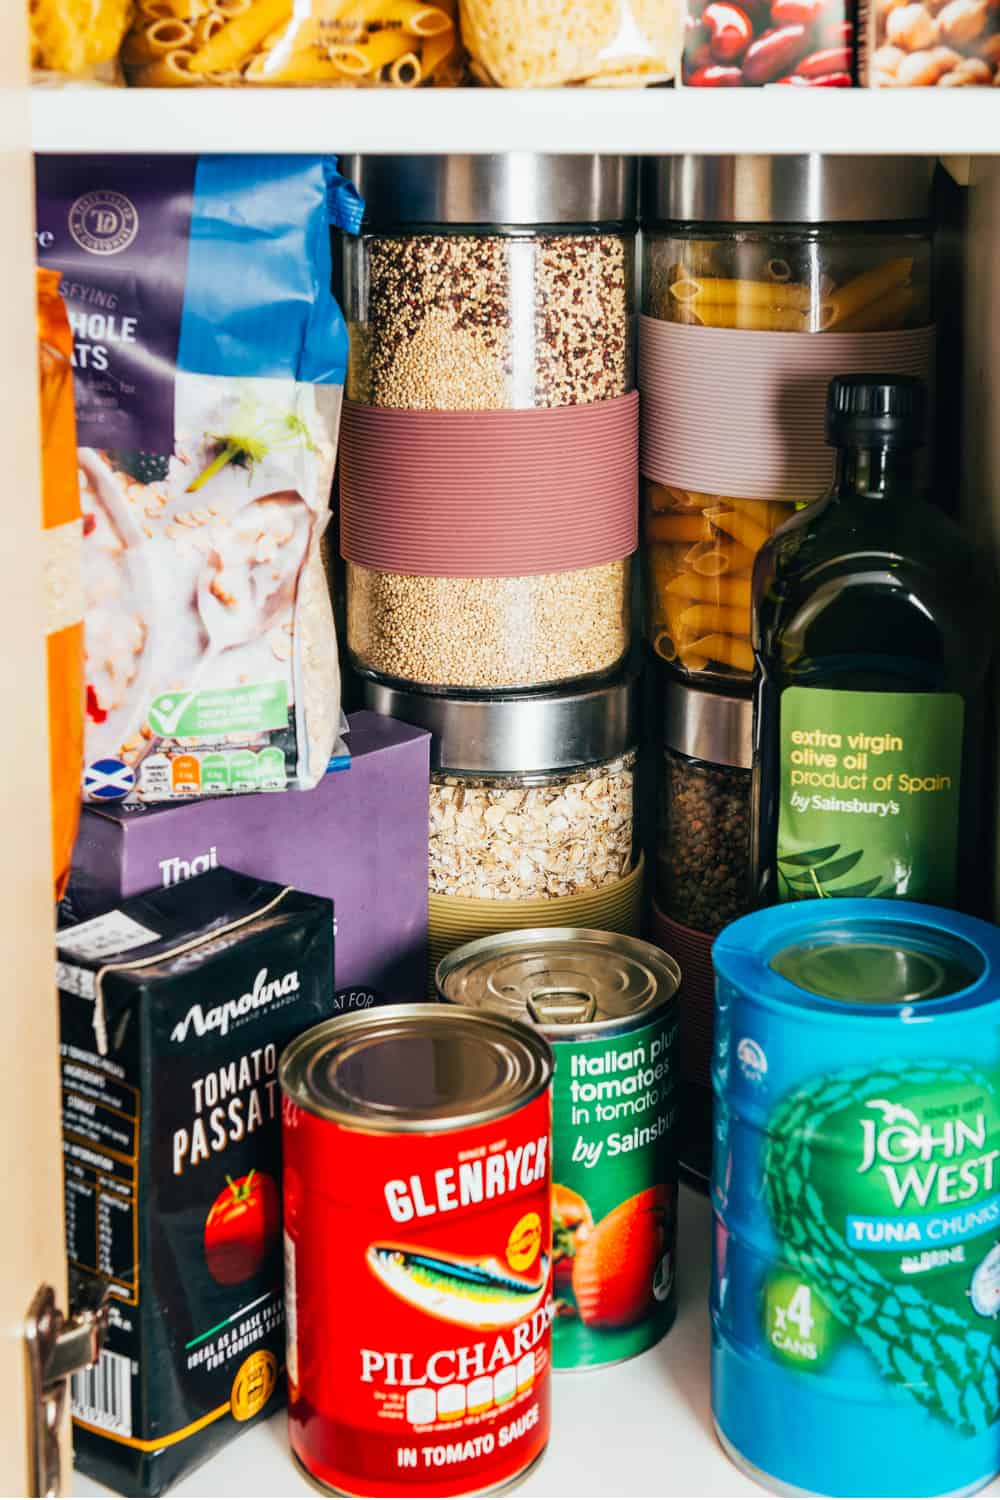 DIY Canned Food Storage Ideas - How to Organize Canned Goods